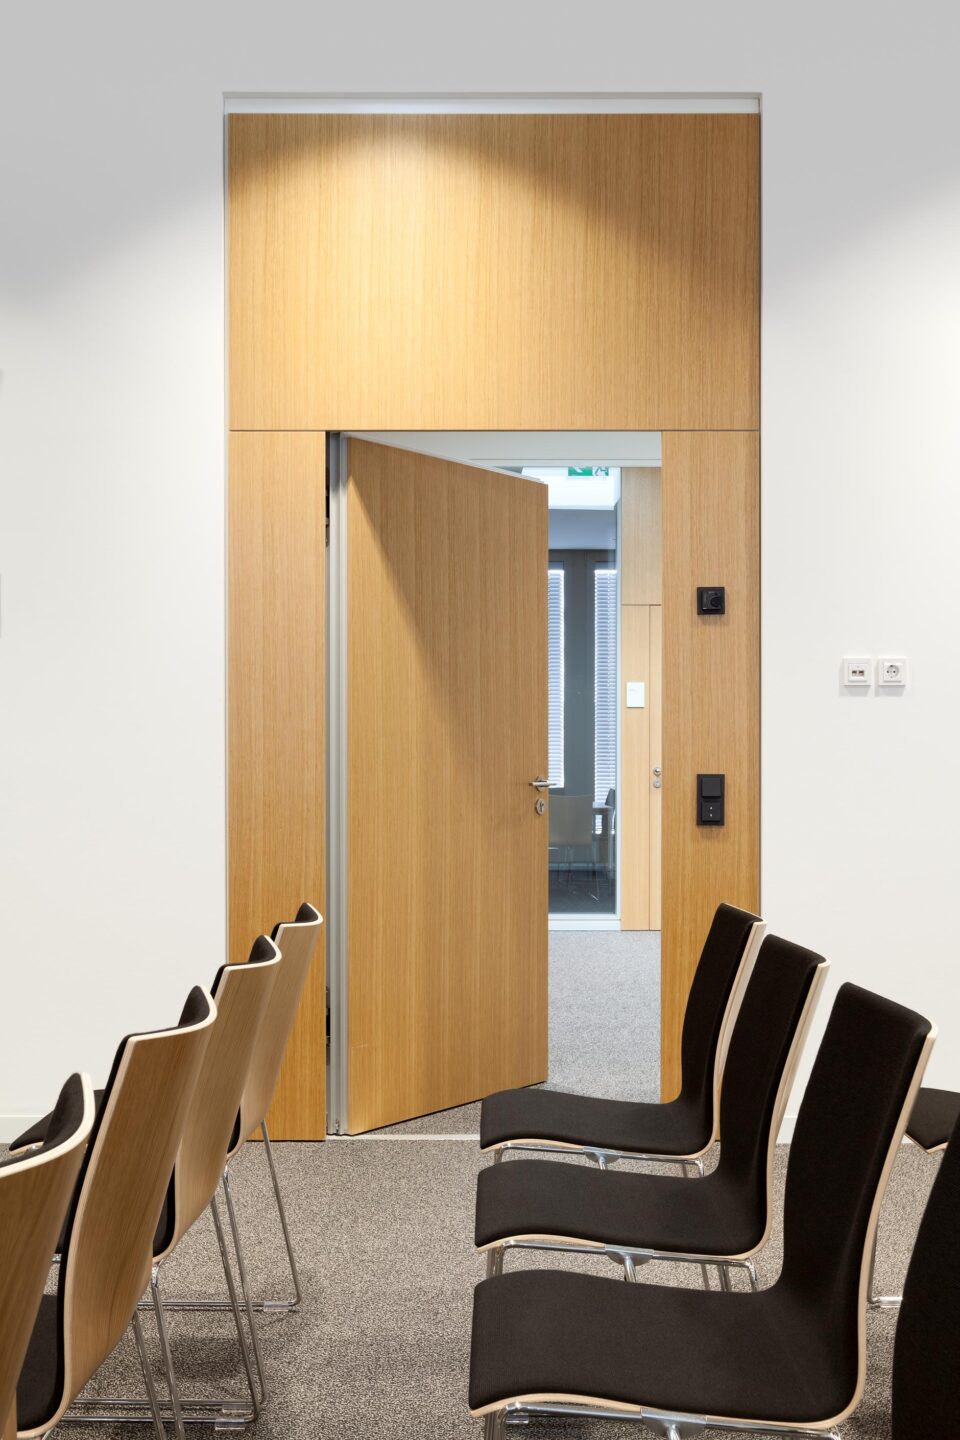 Sparkasse Ulm Haus 66 │ frameless fecostruct structural glazing │ meeting room